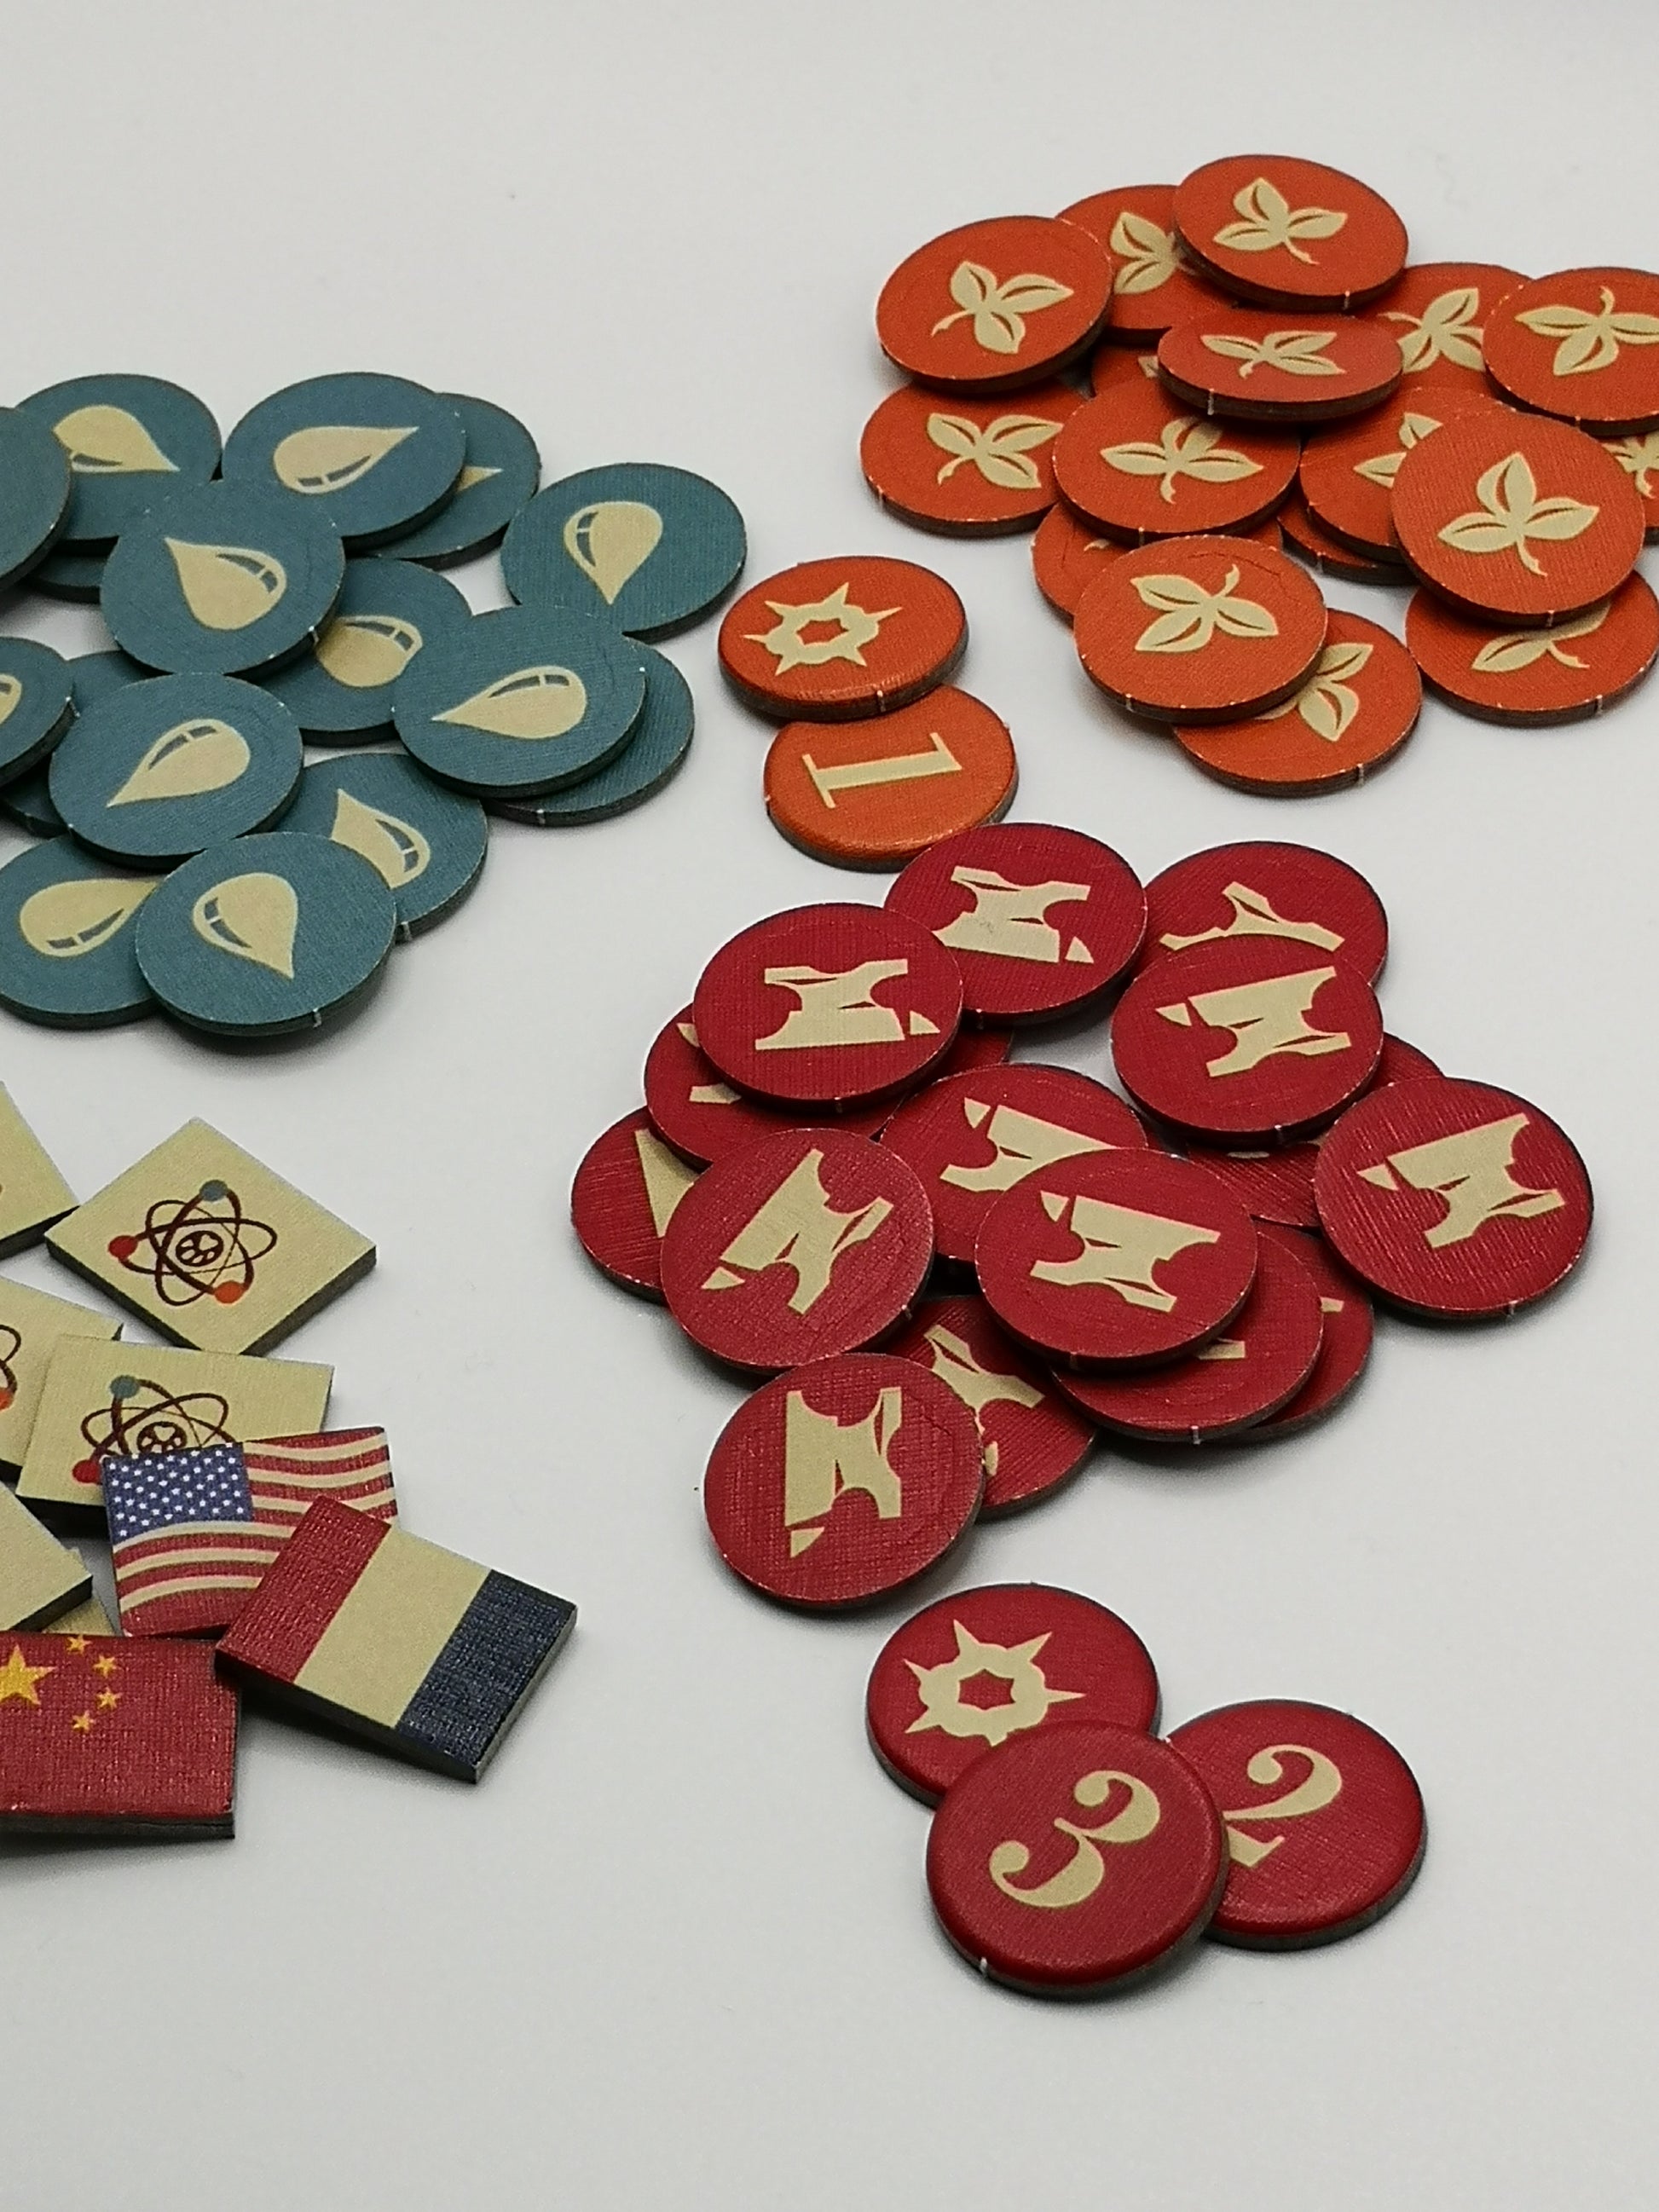 Close up of game components.